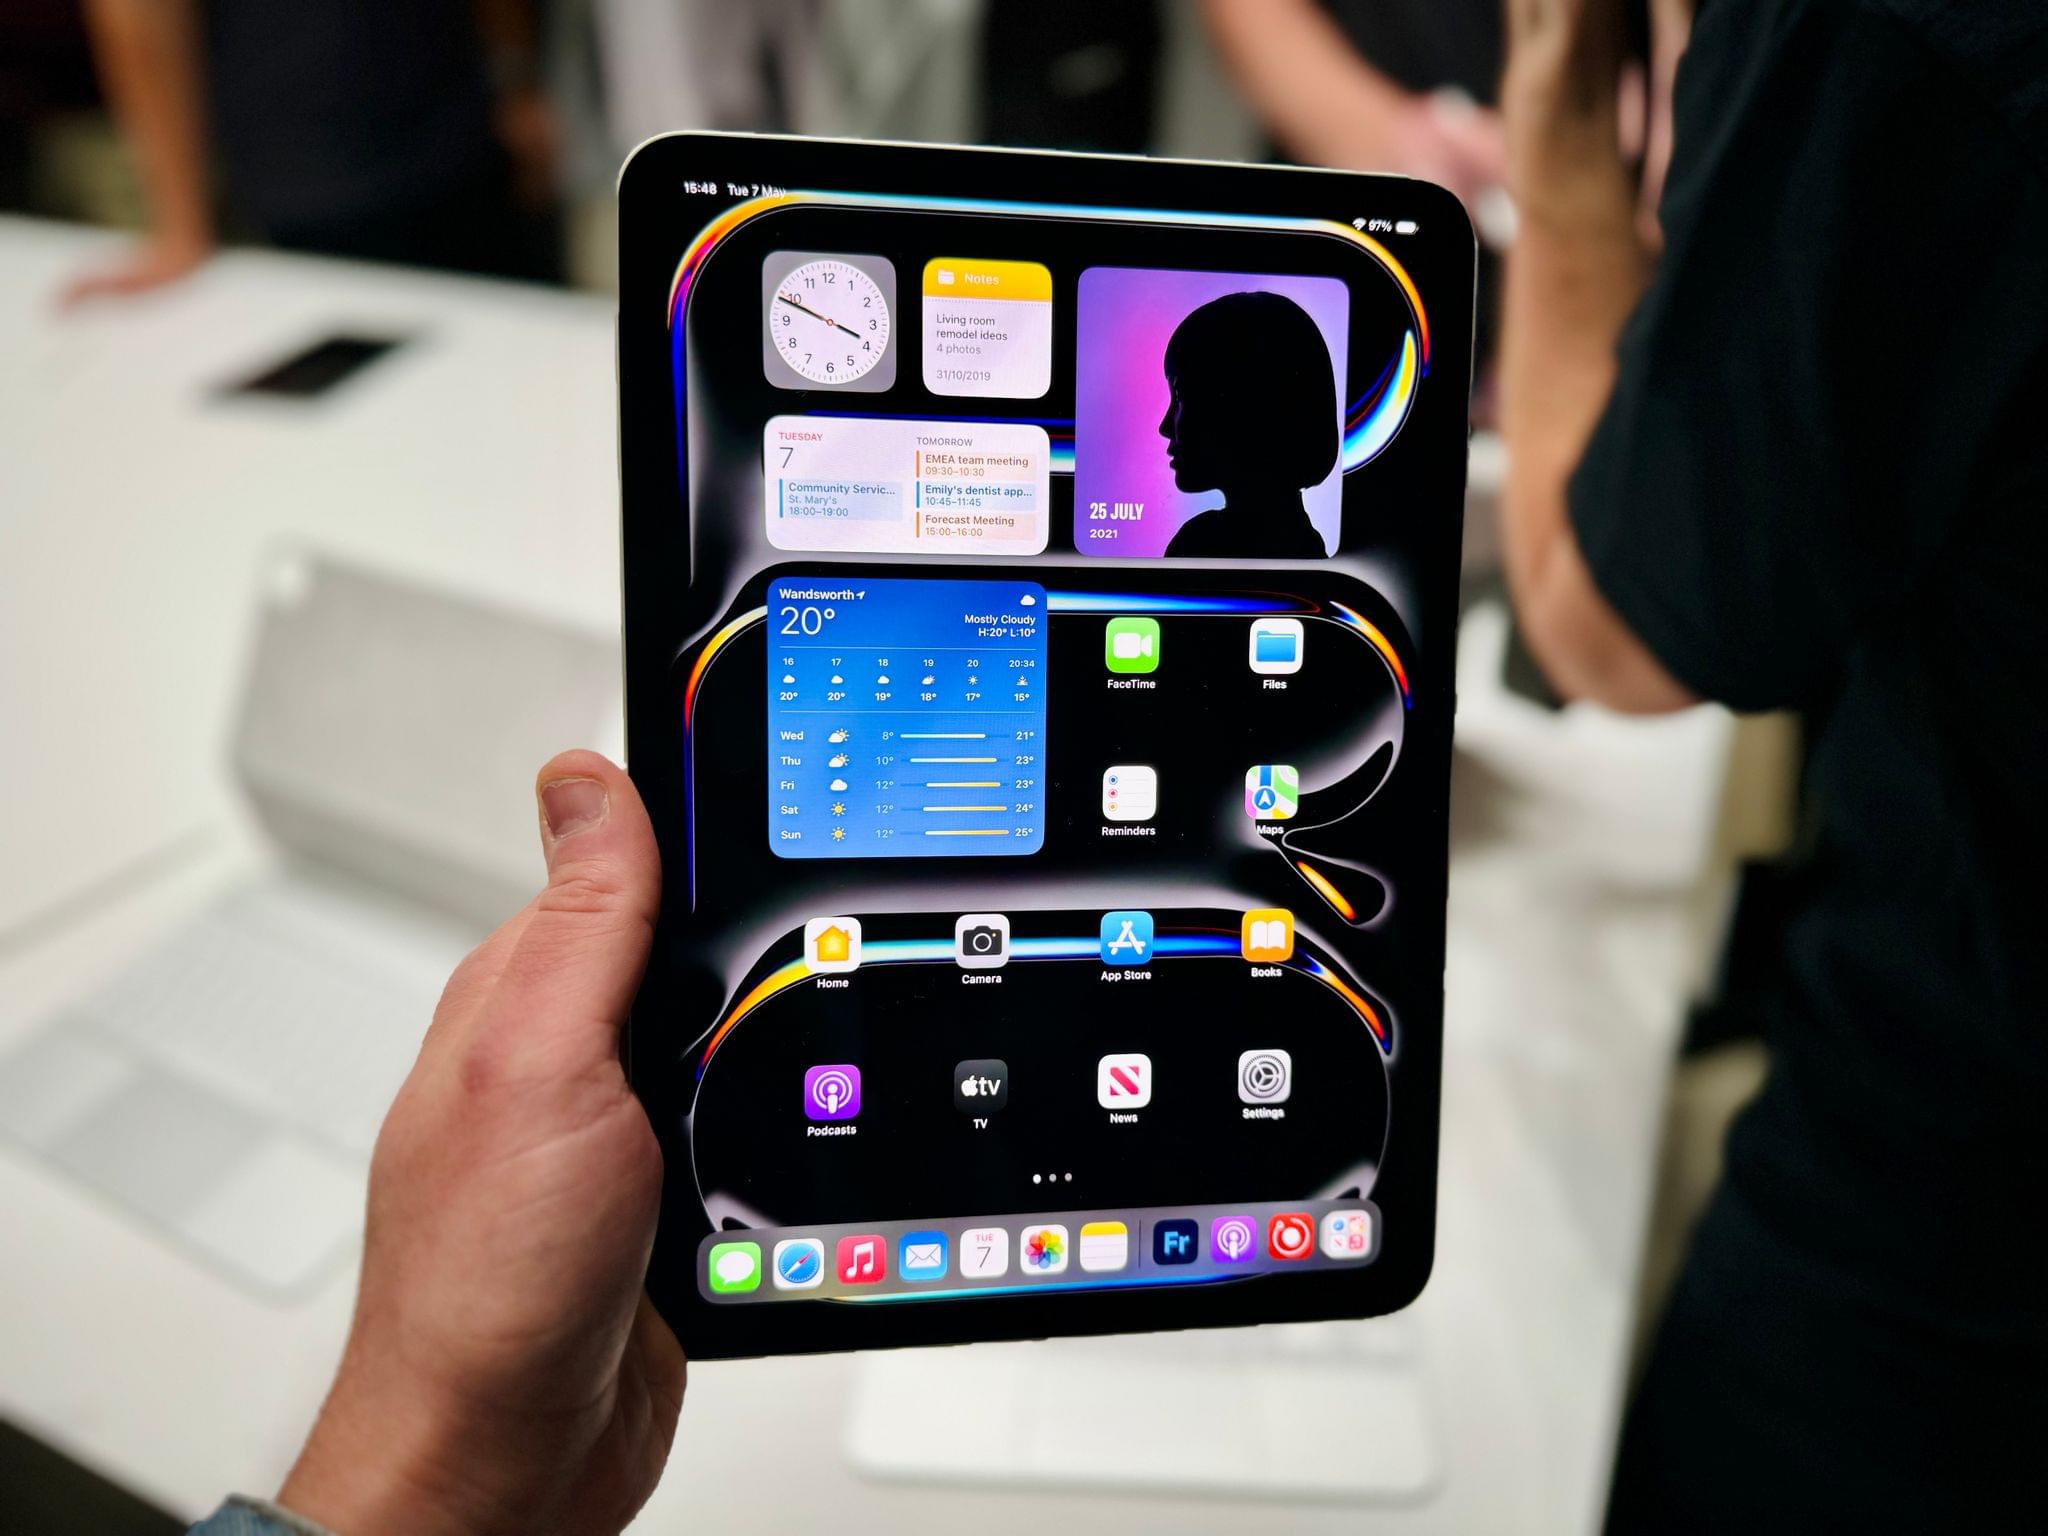 The colors on these new iPads look incredible.